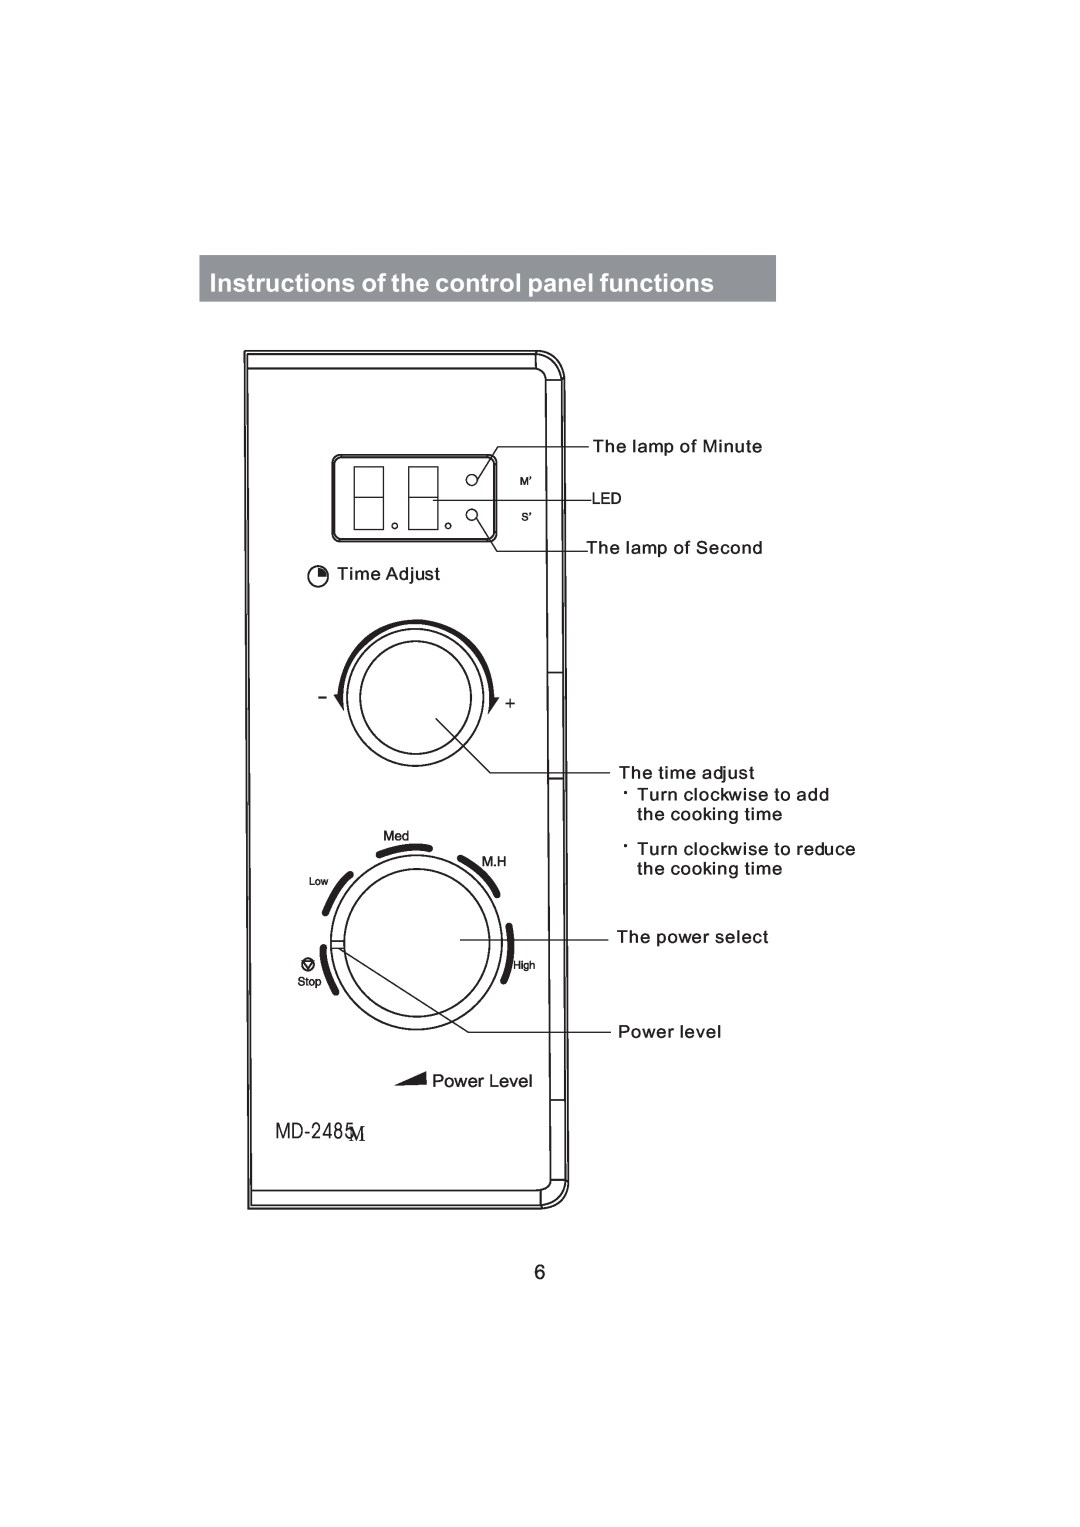 Haier MD-2485MG manual Instructions of the control panel functions 